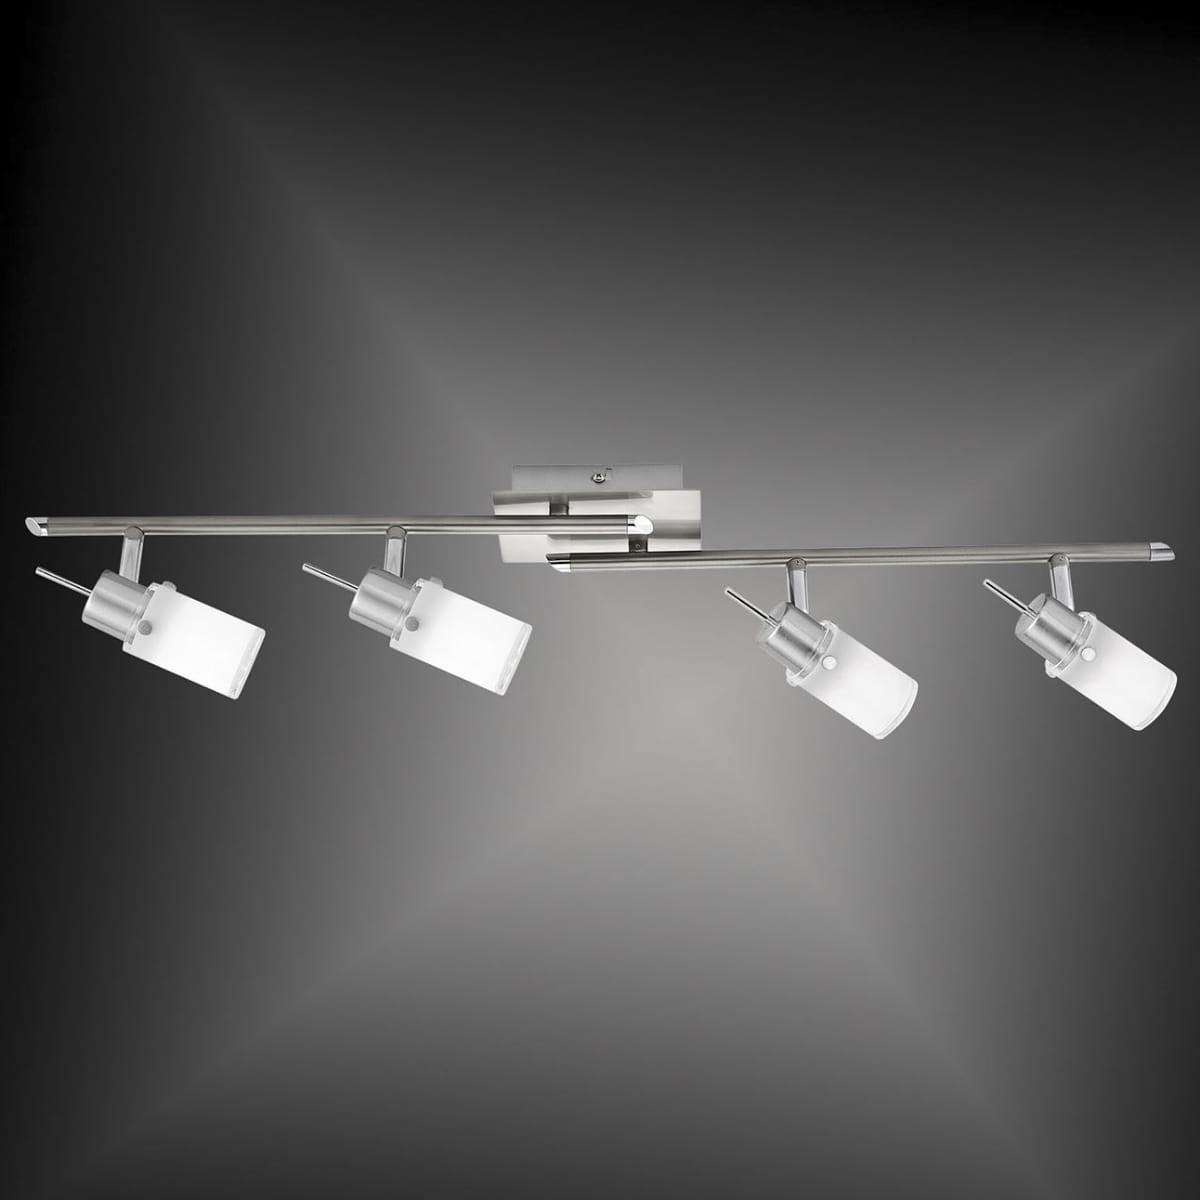 LED ceiling light in steel with 4 adjustable light heads and warm white light color shines glare-free - Peter Murphy Lighting & Electrical Ltd